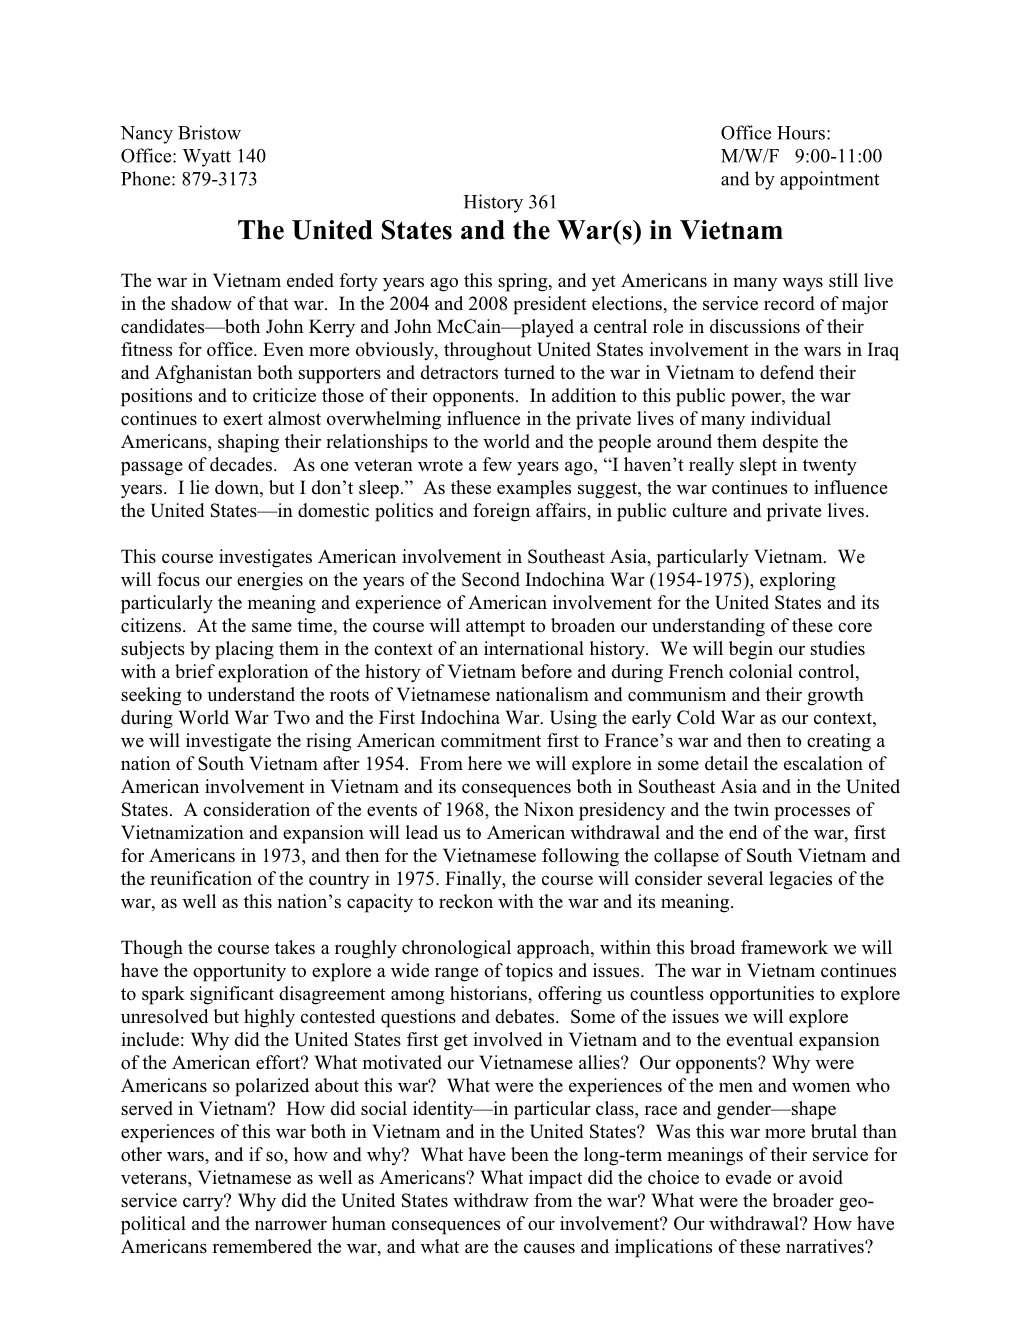 The United States and the War(S) in Vietnam